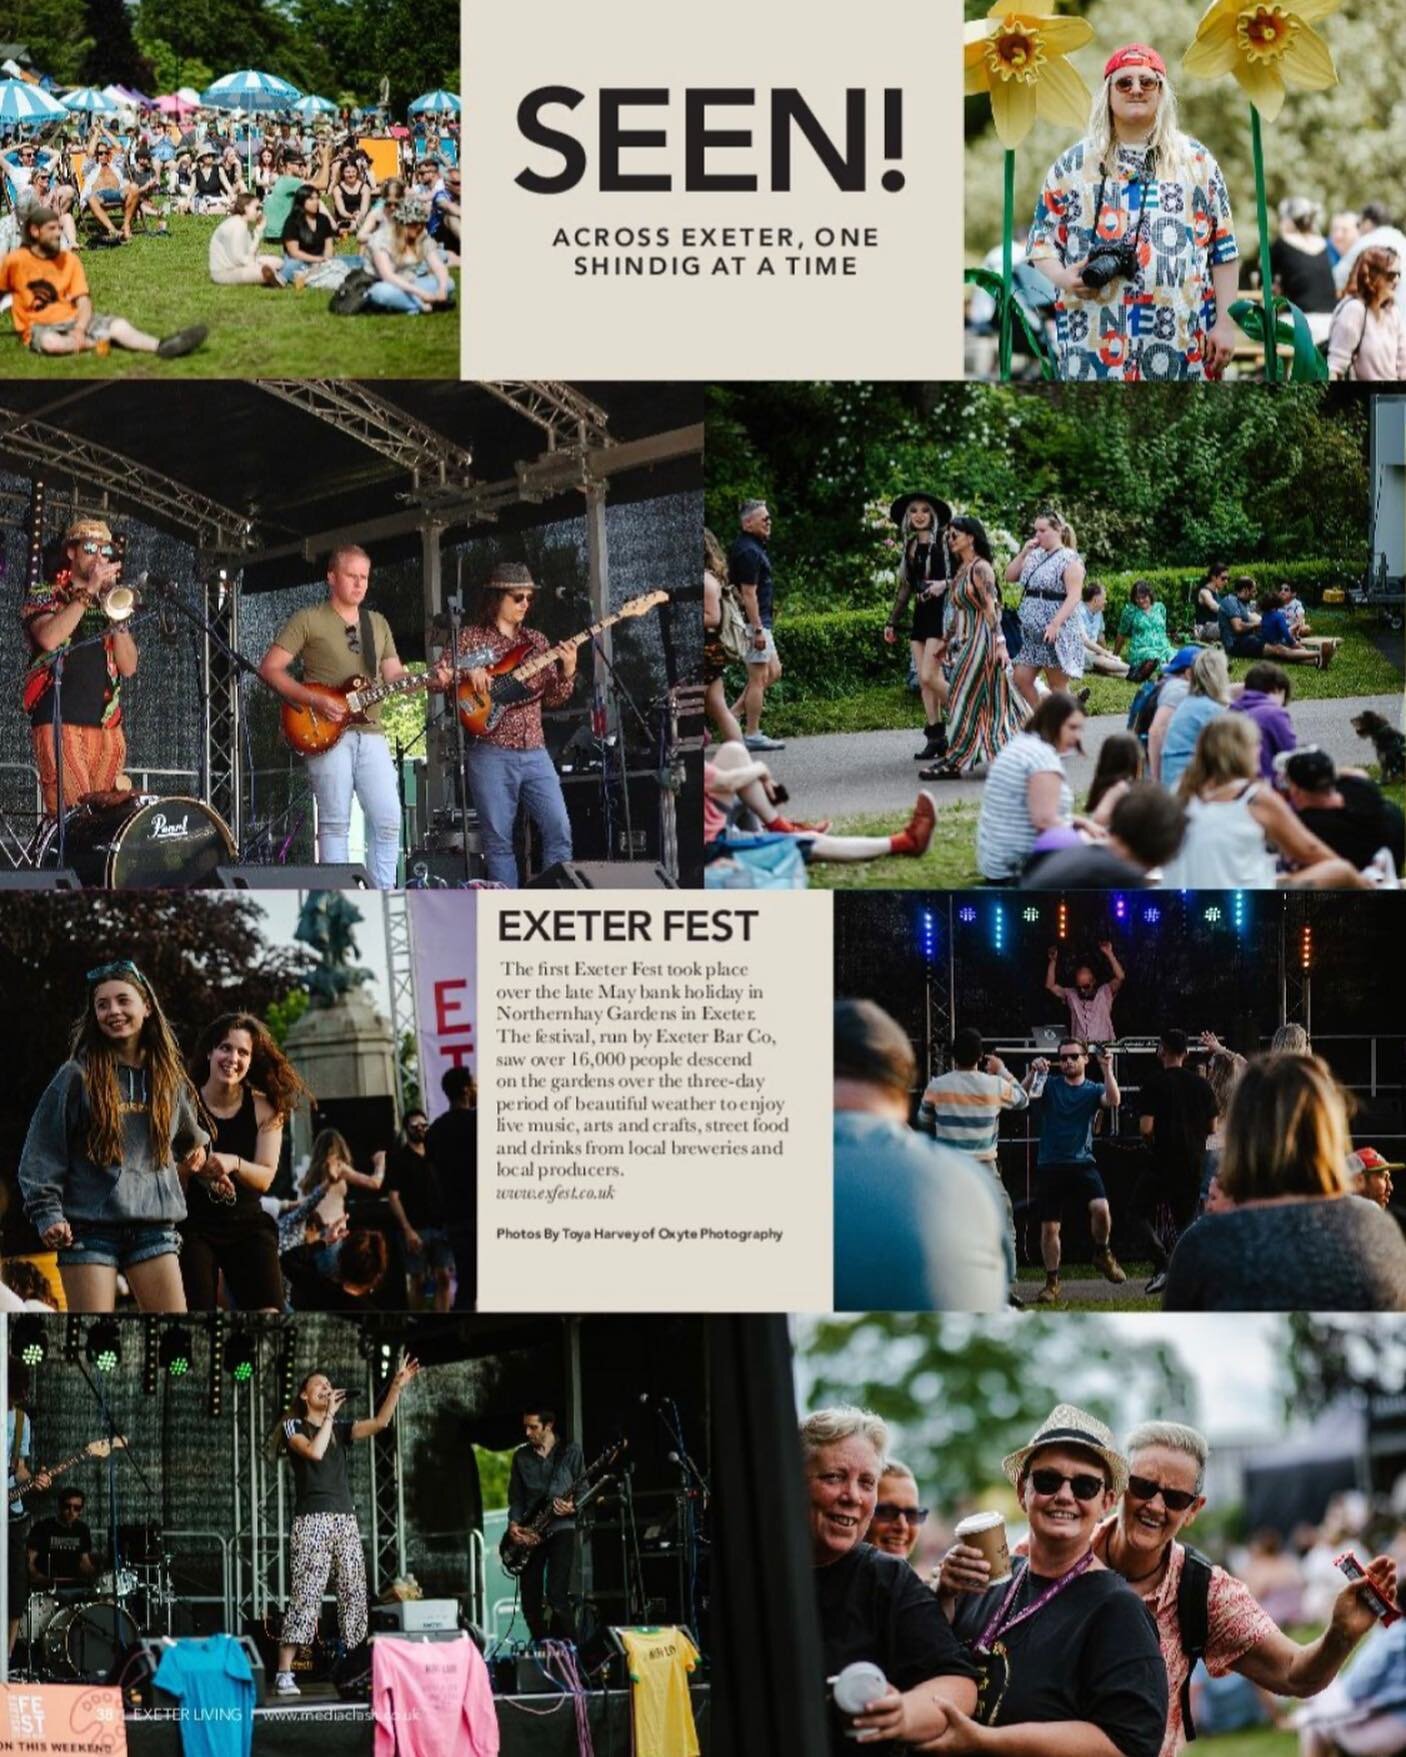 Thank you @exeterlivingmag for featuring us in the latest beautiful issue! Such a great way to celebrate the great success of EXETER FEST Year 1!! See you next year! #exeter #celebratingcommunity